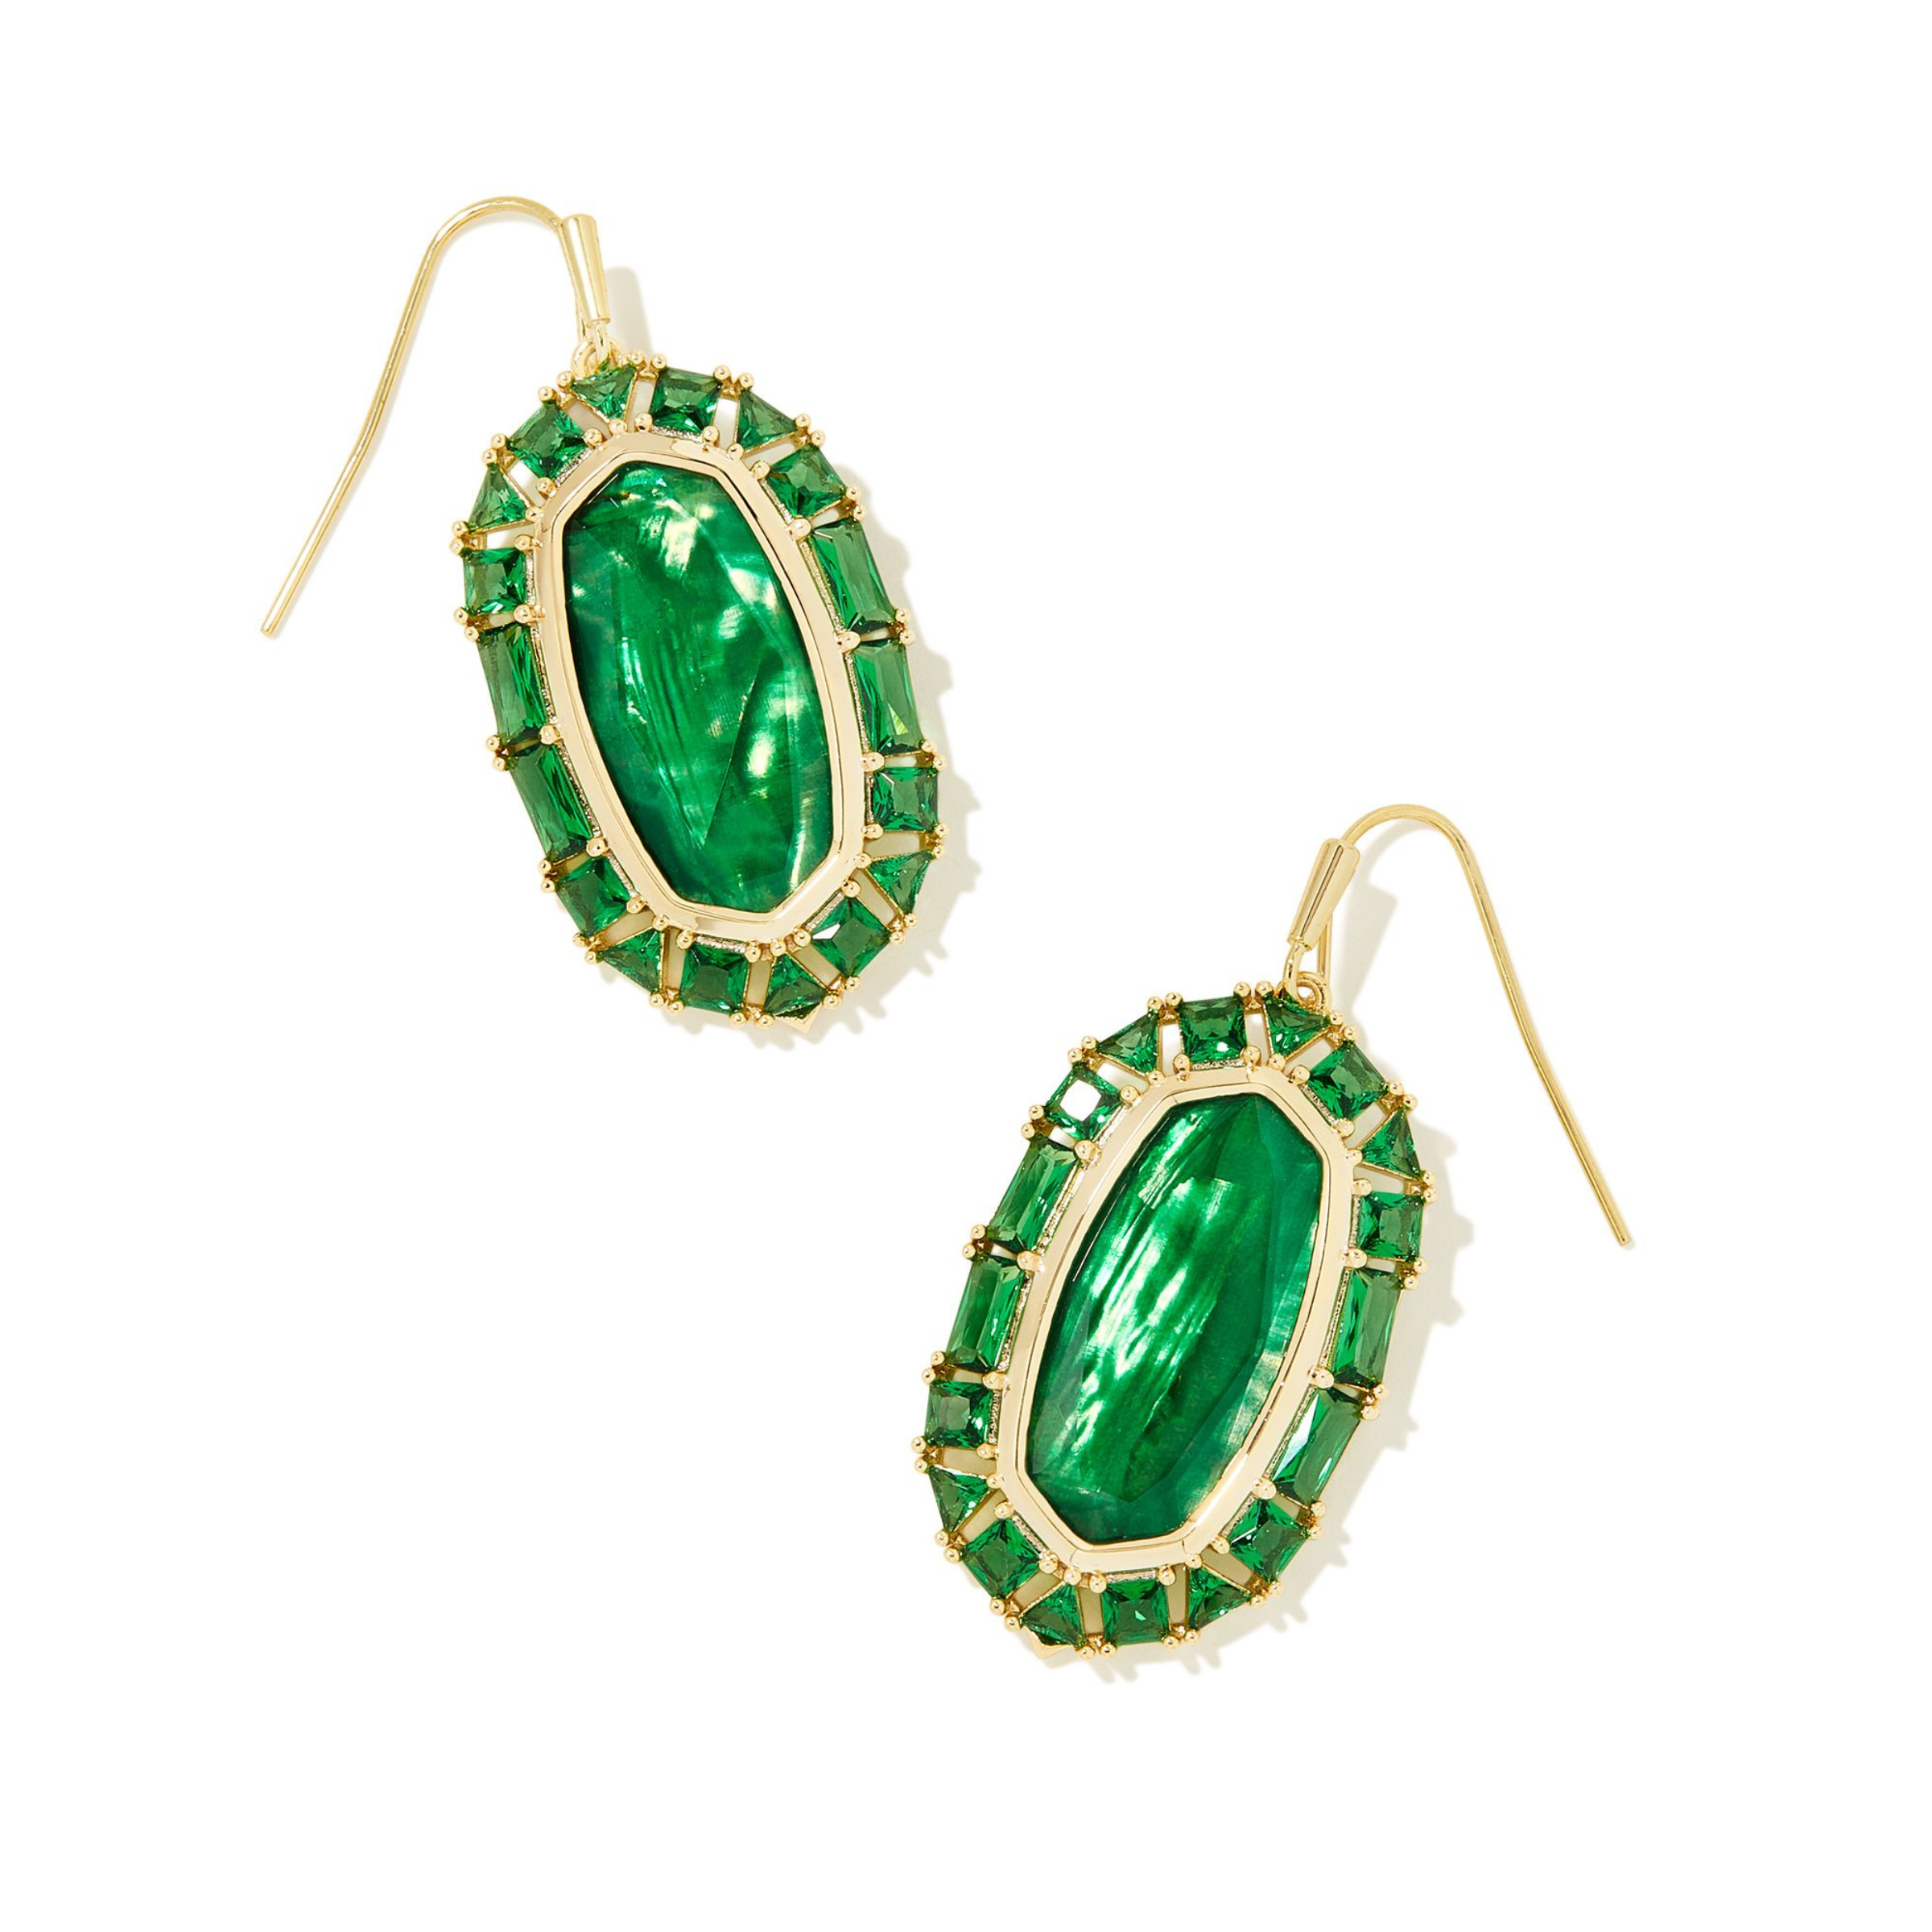 Gold, clear crystal frame drop earrings with kelly green illusion center stone pictured on a white background.